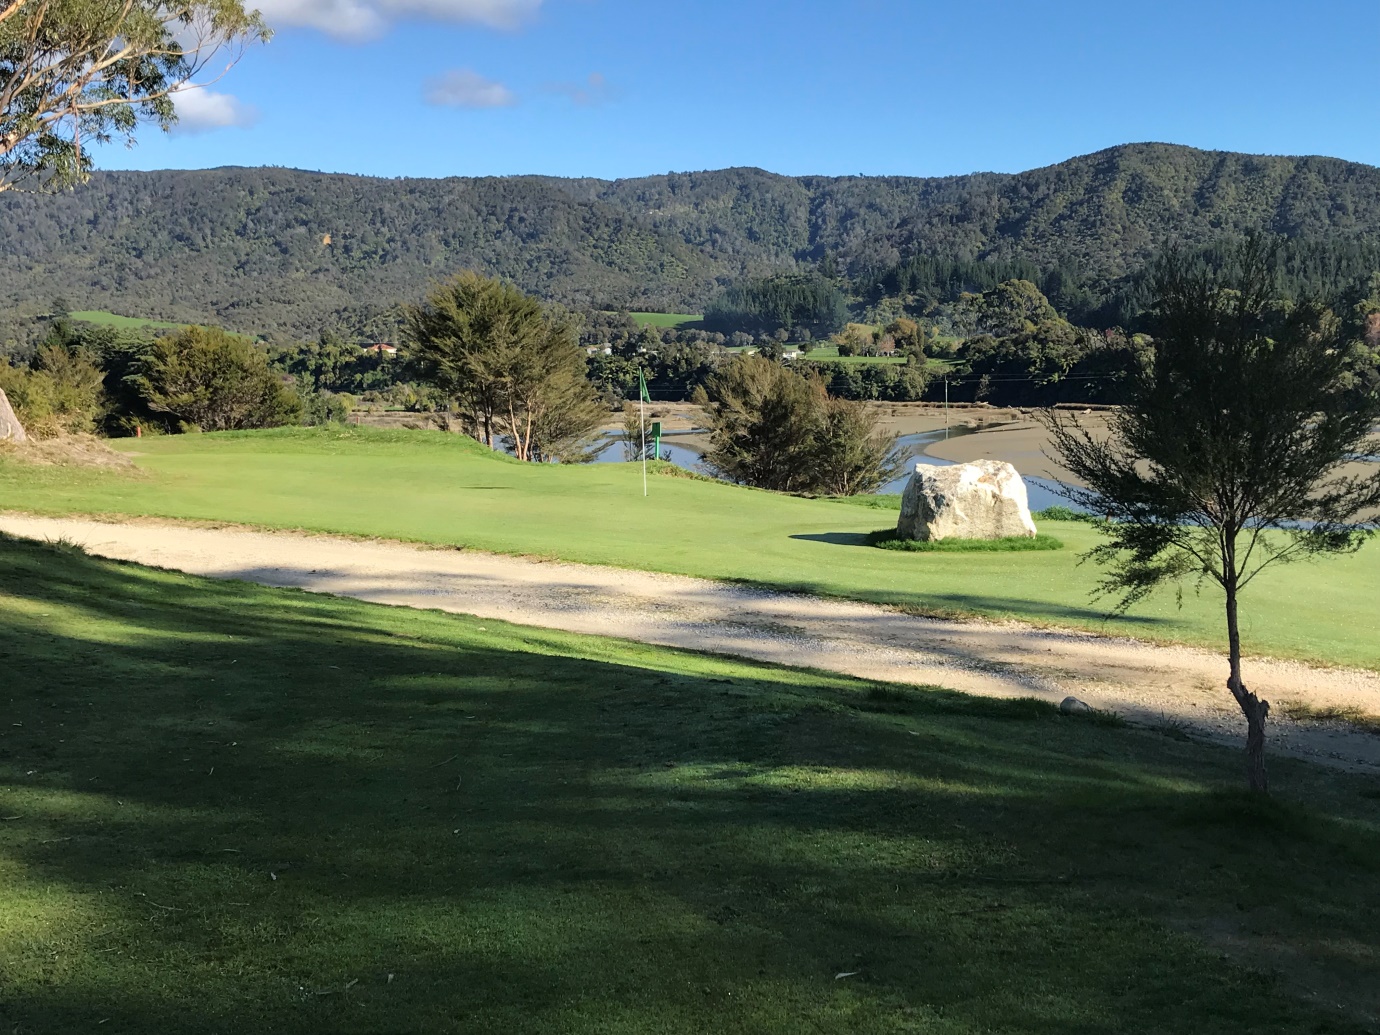 View from the right fairway – still no picnic